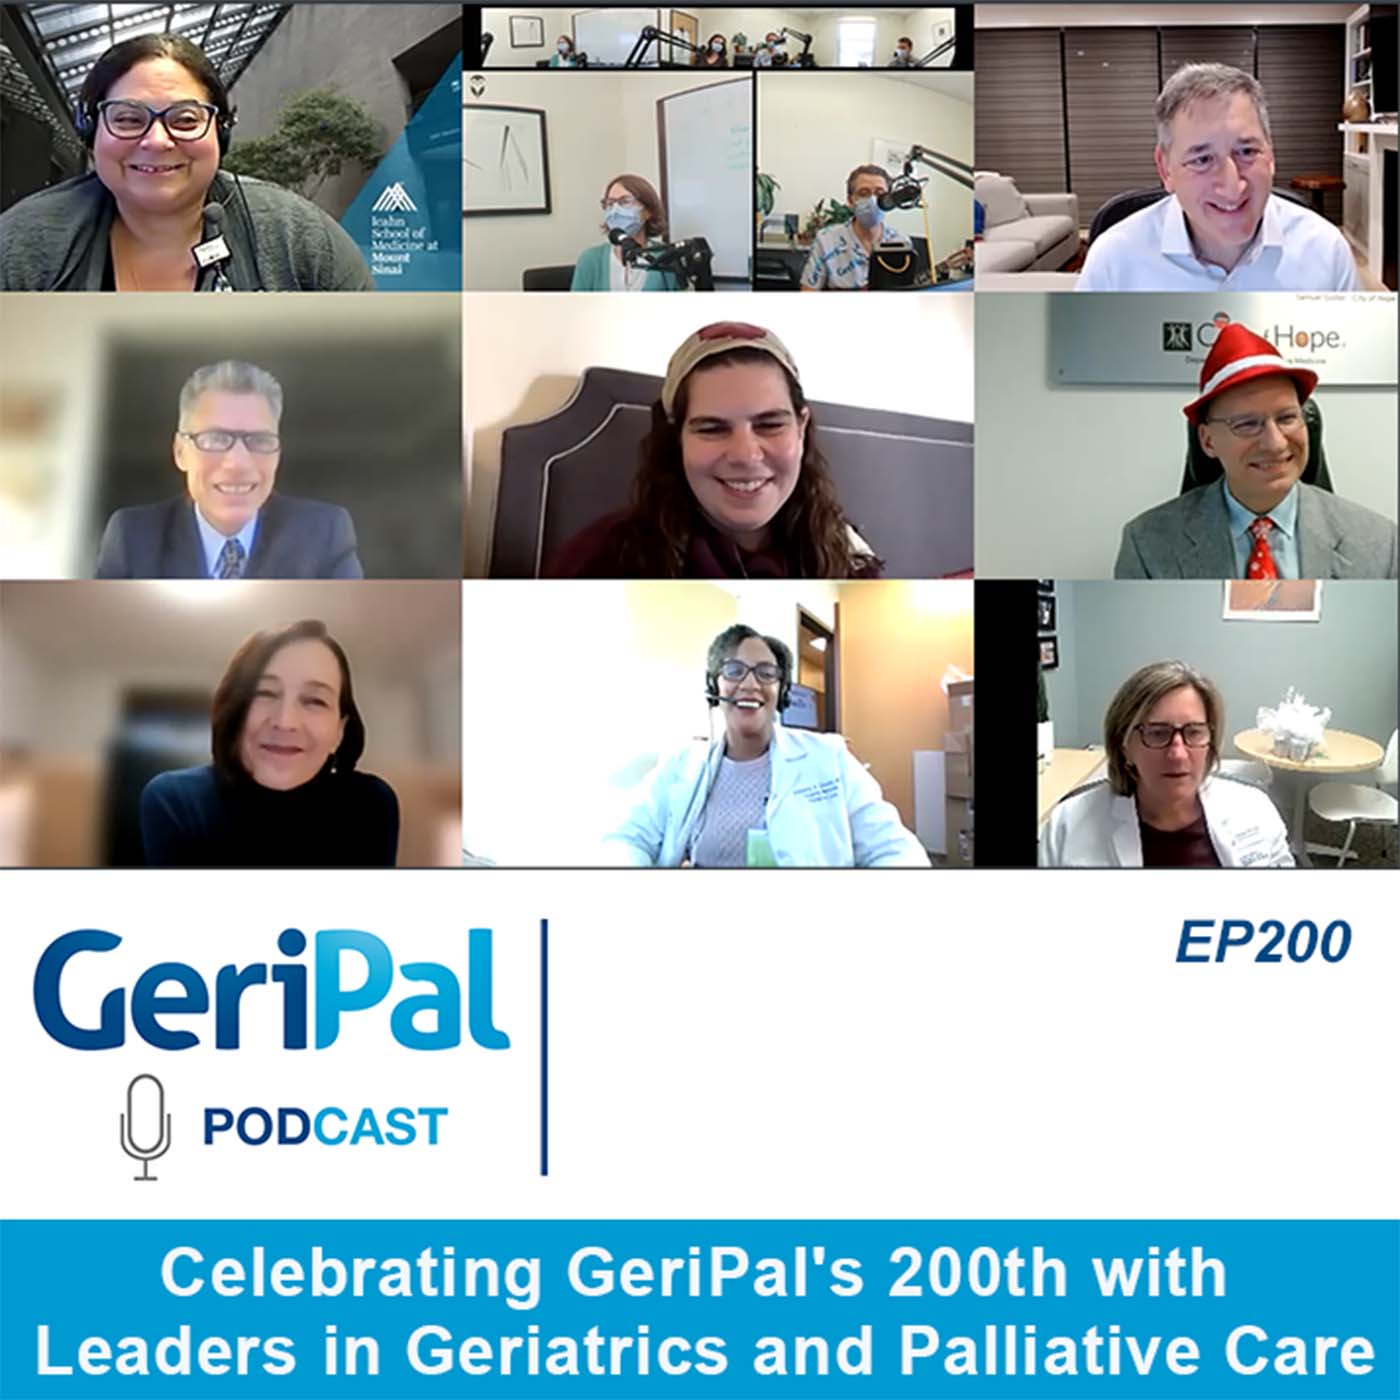 Celebrating GeriPal's 200th with Leaders in Geriatrics and Pallaitive Care